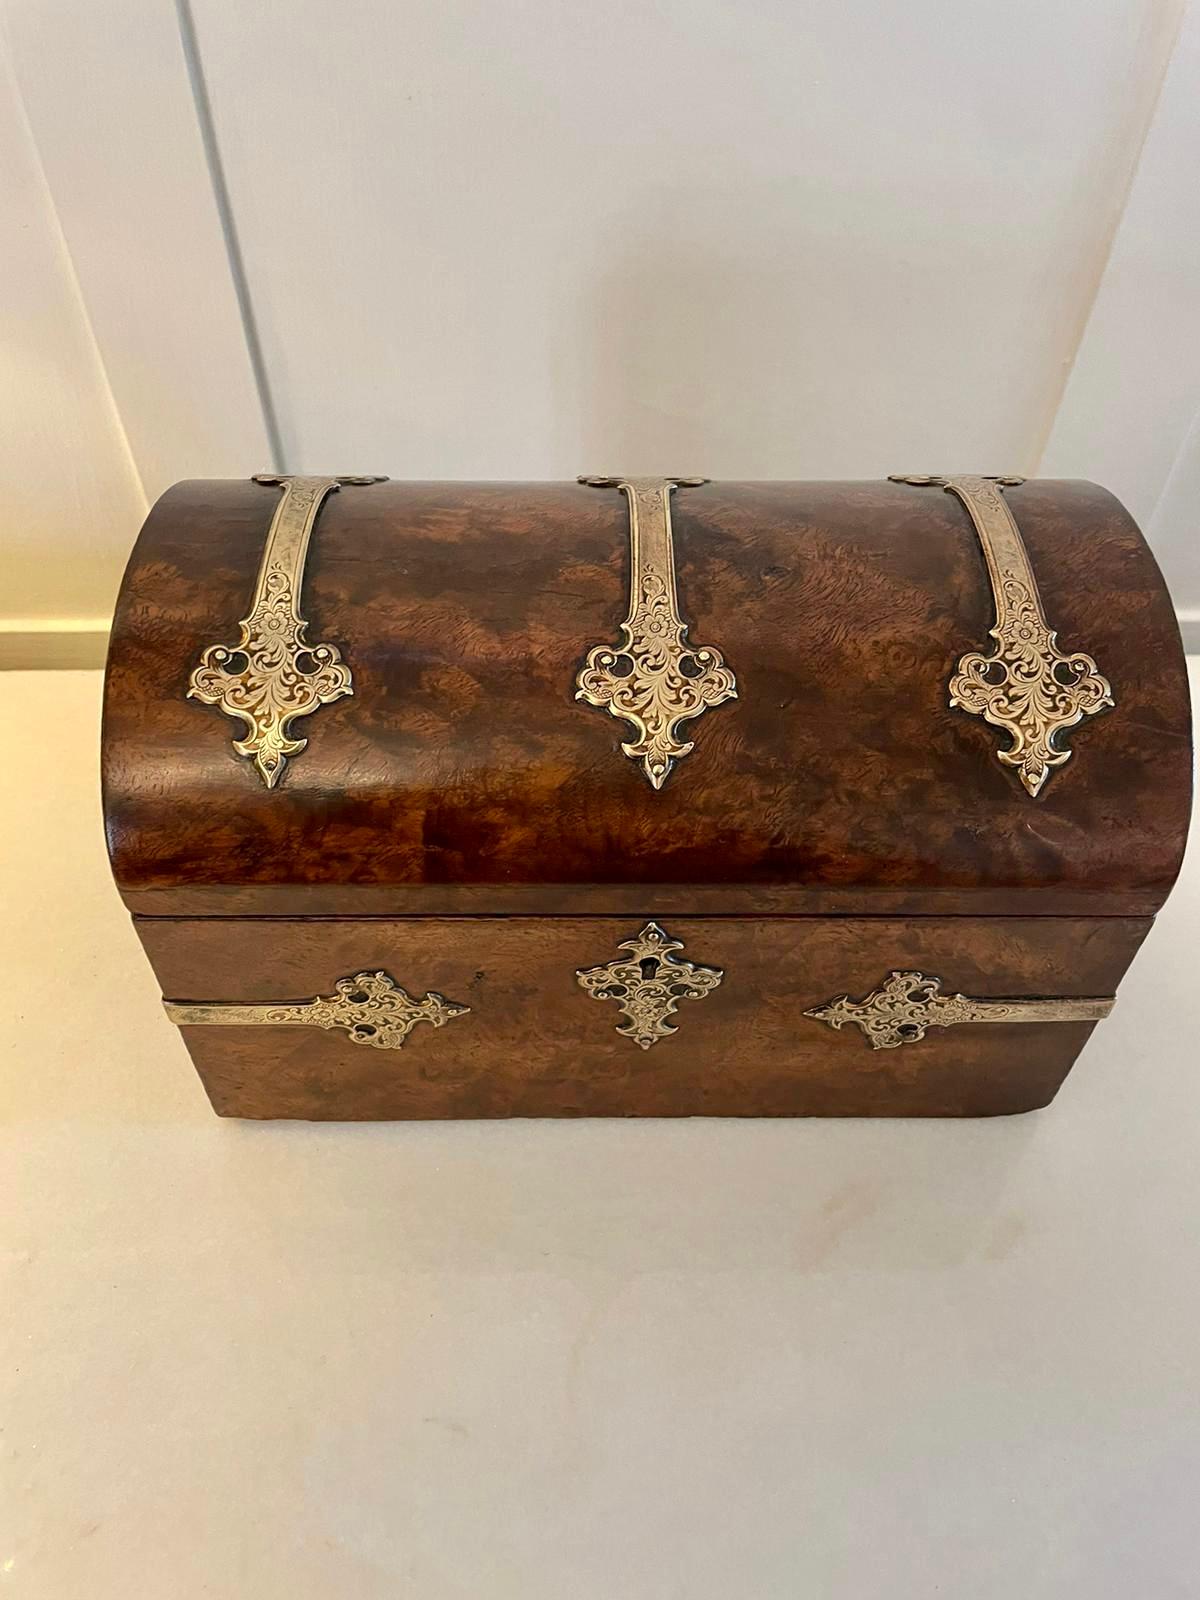 Superb Quality Antique Victorian Burr Walnut and Brass Mounted Tea Caddy In Good Condition For Sale In Suffolk, GB